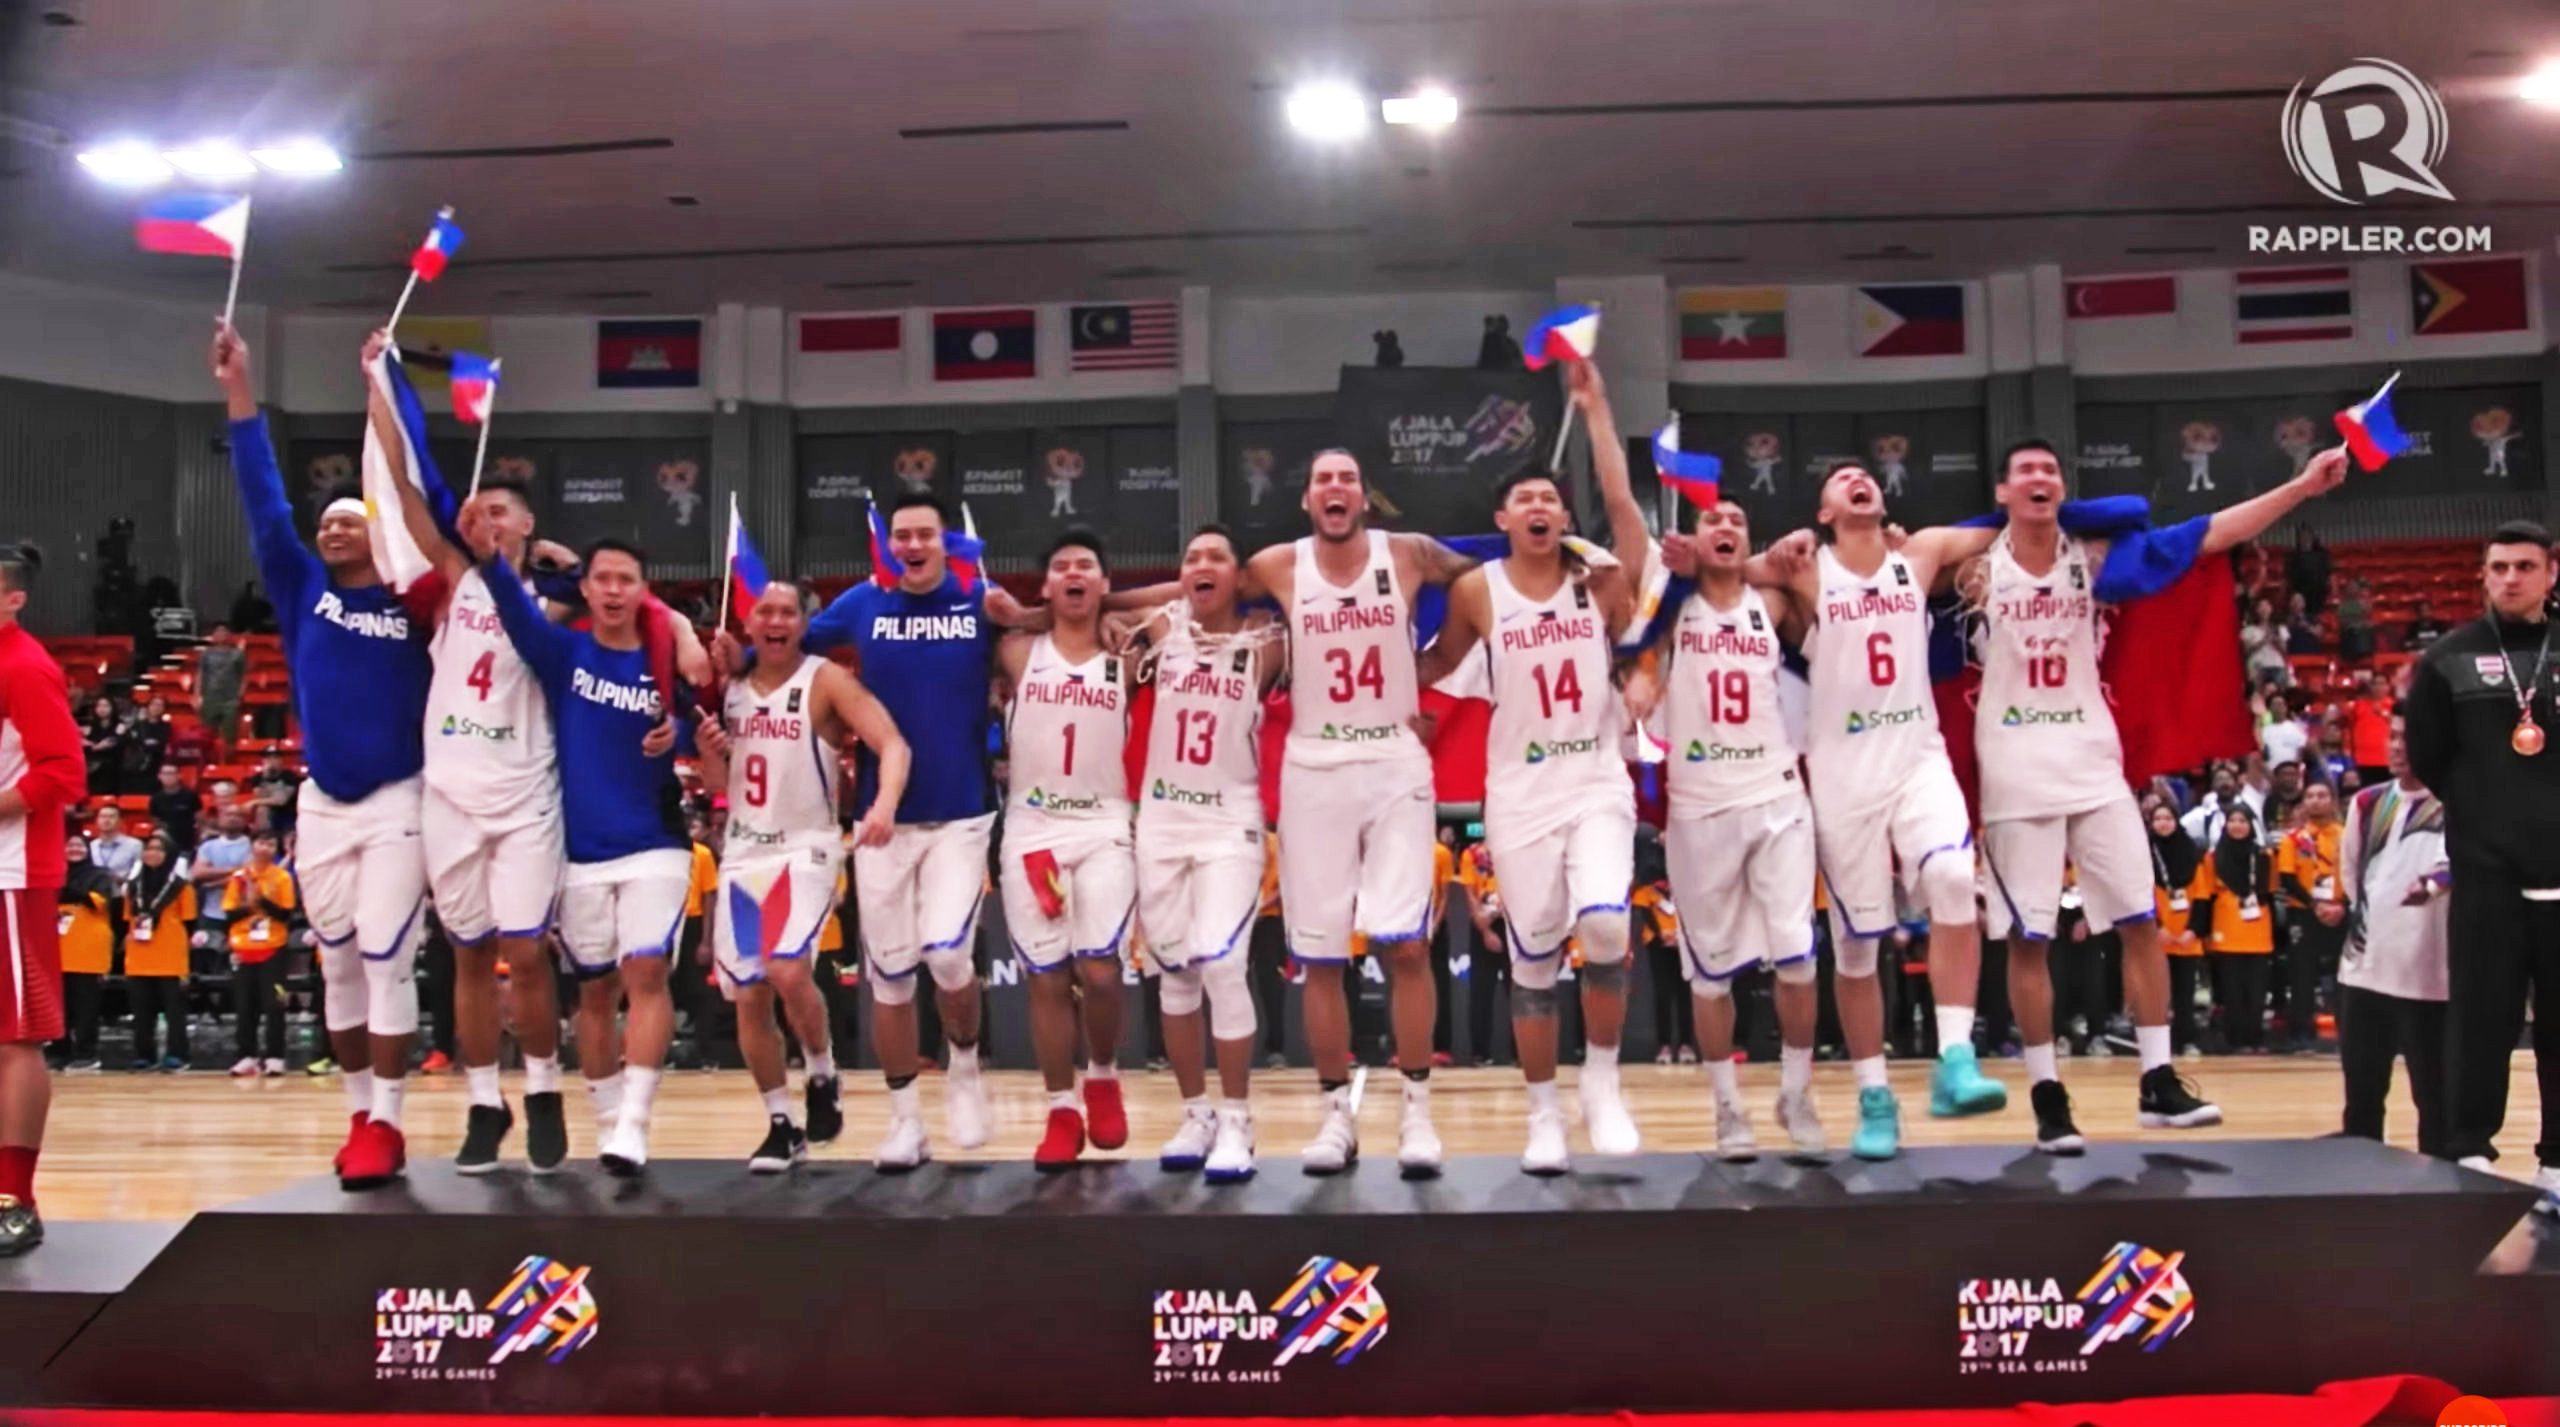 KINGS OF BASKETBALL. Gilas Pilipinas reigns supreme once more over its neighbors in Southeast Asia by sweeping the men's basketball tournament for its 18th gold. Photo by Adrian Portugal/Rappler 